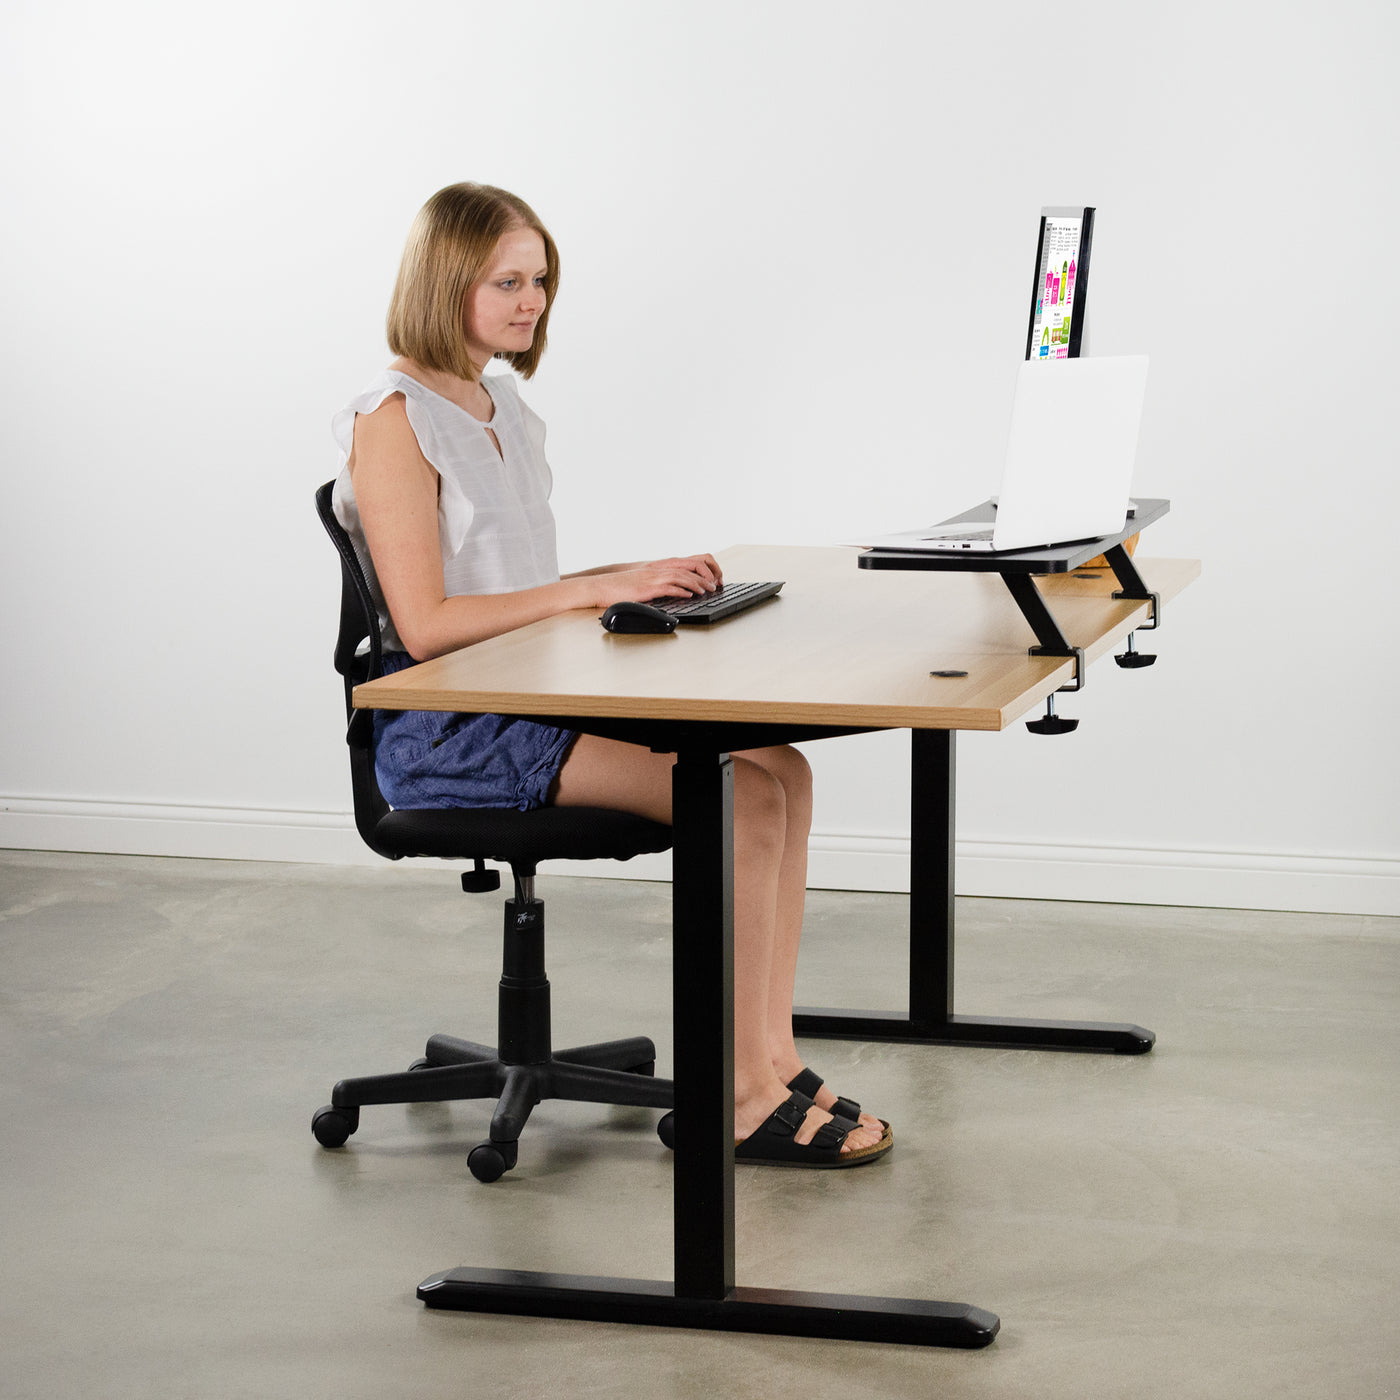 A woman working from an ergonomic office desk with a back of desk clamp on riser.